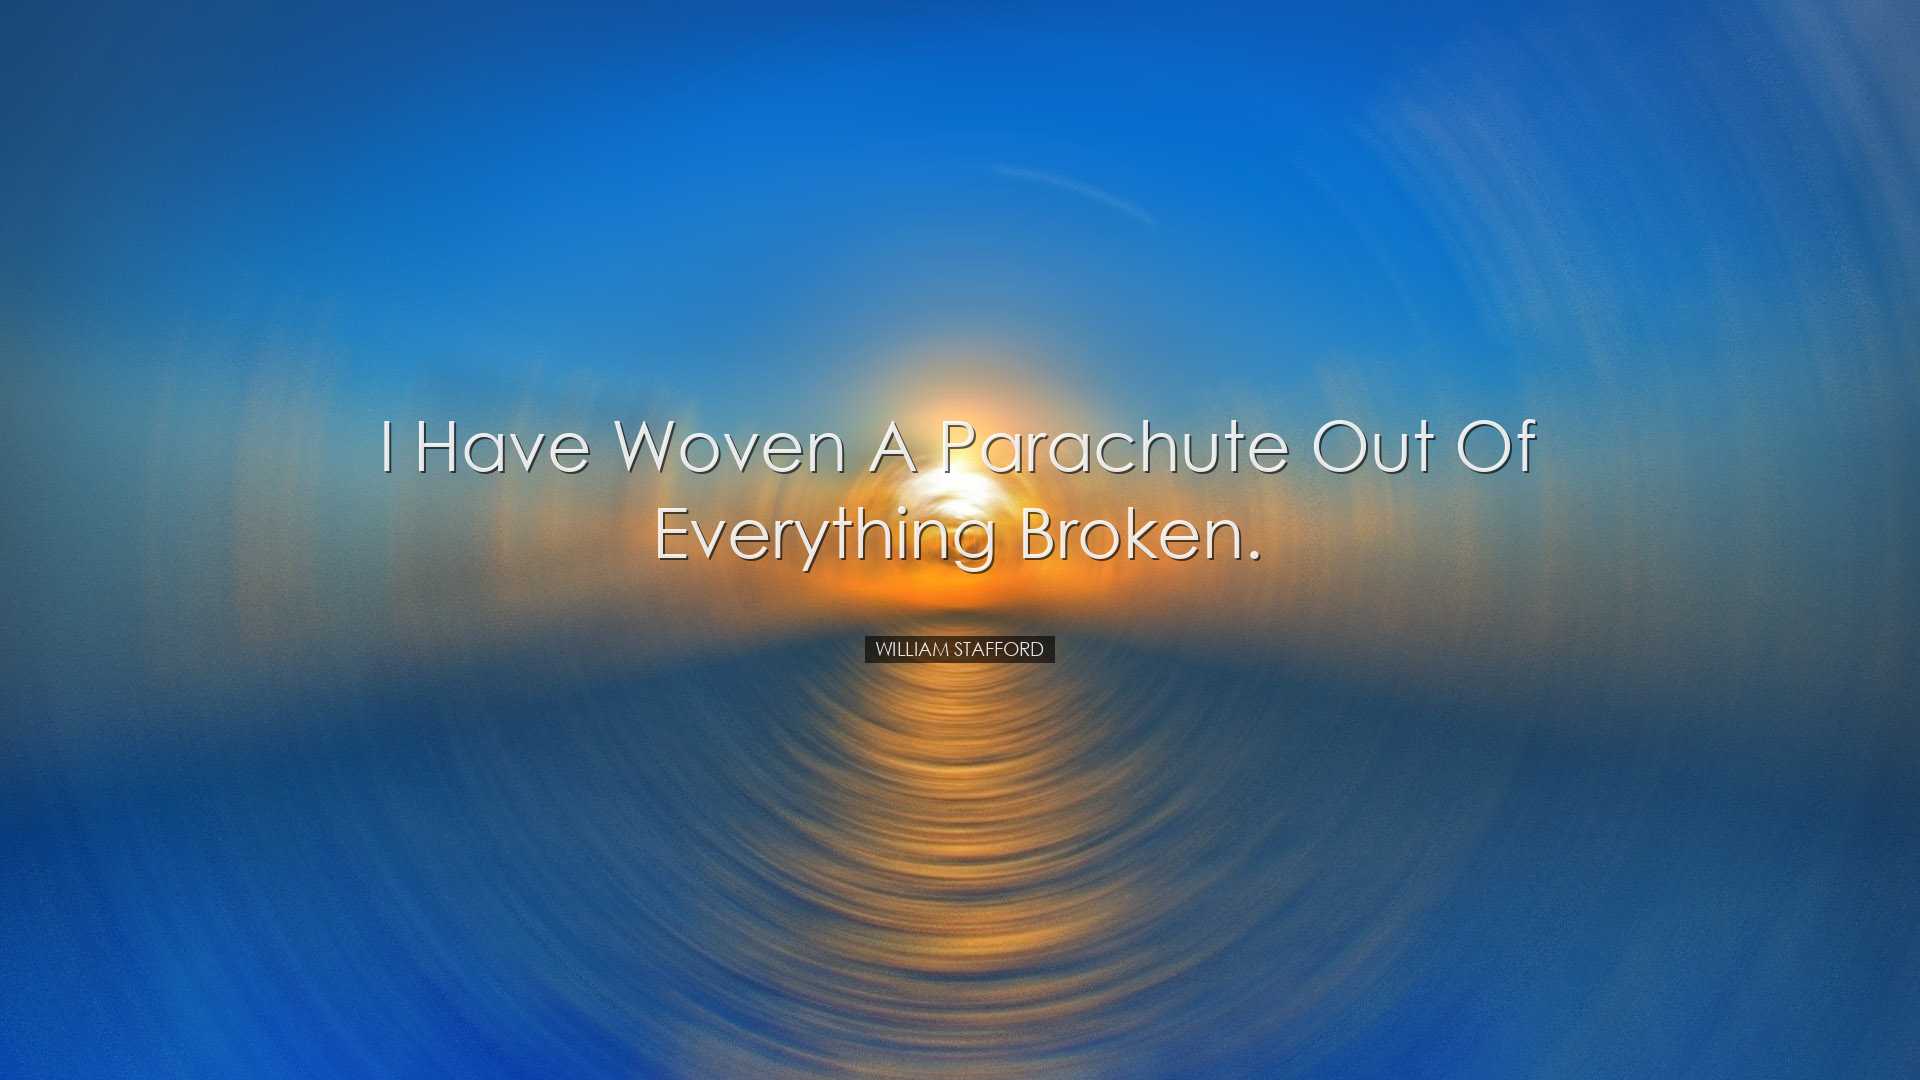 I have woven a parachute out of everything broken. - William Staff